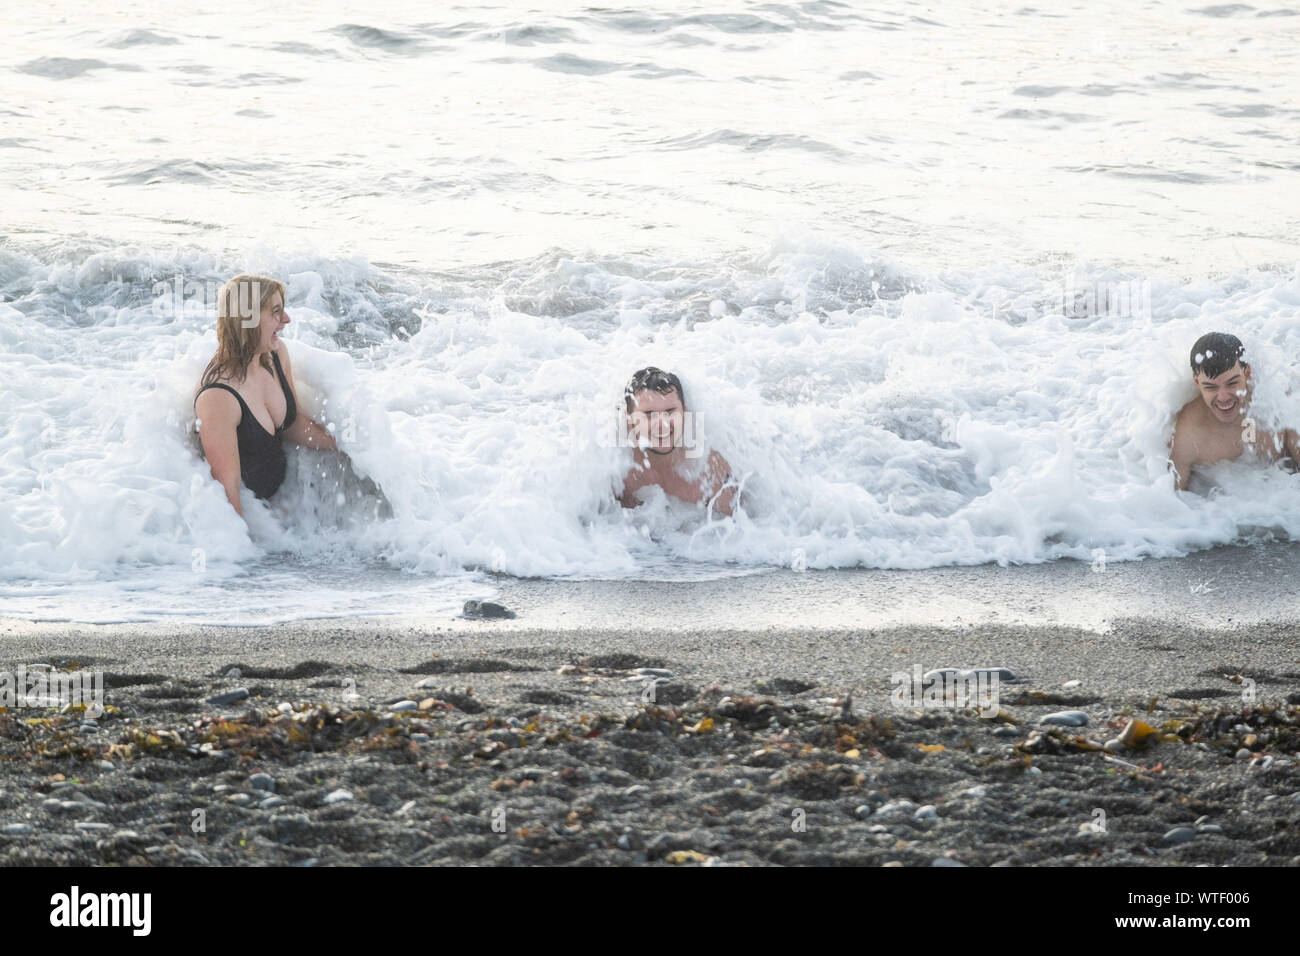 Aberystwyth Wales UK, Wednesday 11 September 2019  UK Weather: A group of young people enjoying an evening swim in the sea at Aberystwyth Wales, as the weather is forecast to turn slightly warmer, especially inthe south east, over the coming days.  Photo credit: Keith Morris / Alamy Live News Stock Photo